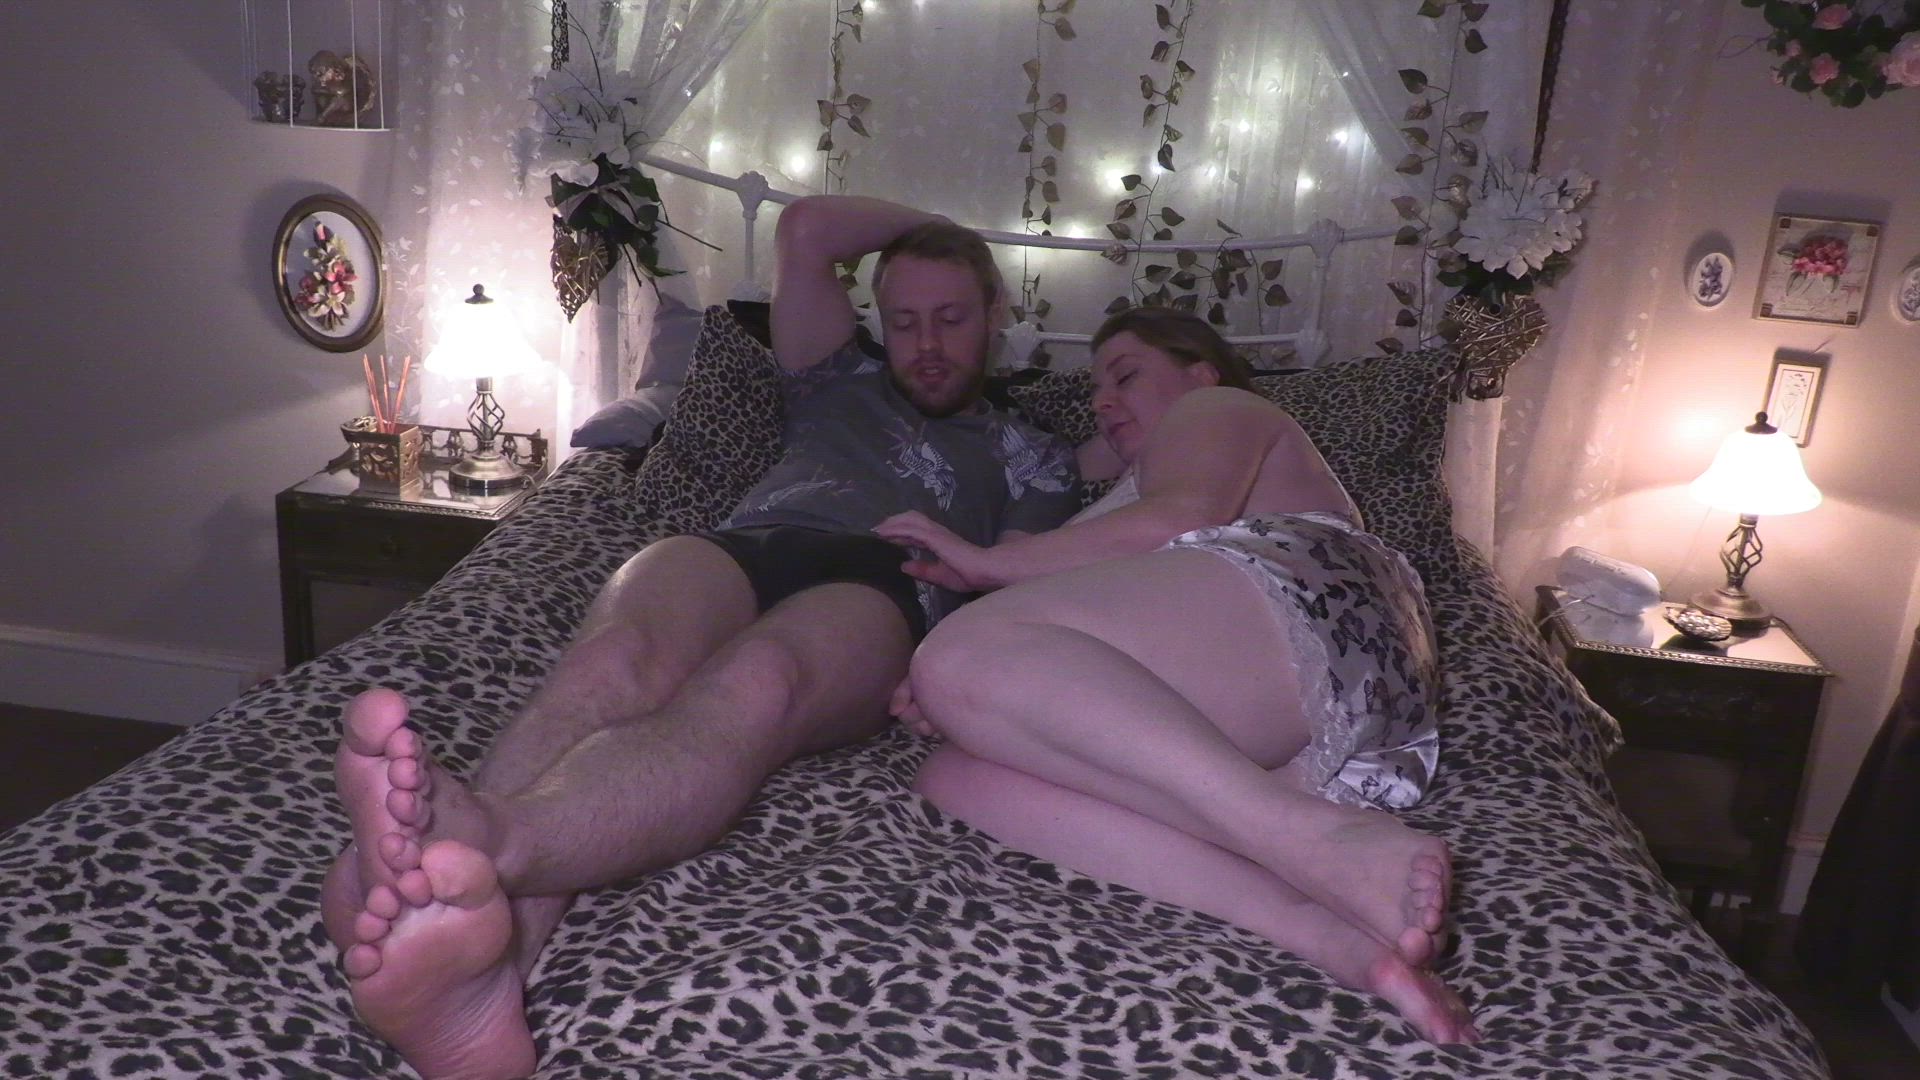 Amateur porn video with onlyfans model Hotwife Rachel <strong>@cuckoldcoupleplus1</strong>